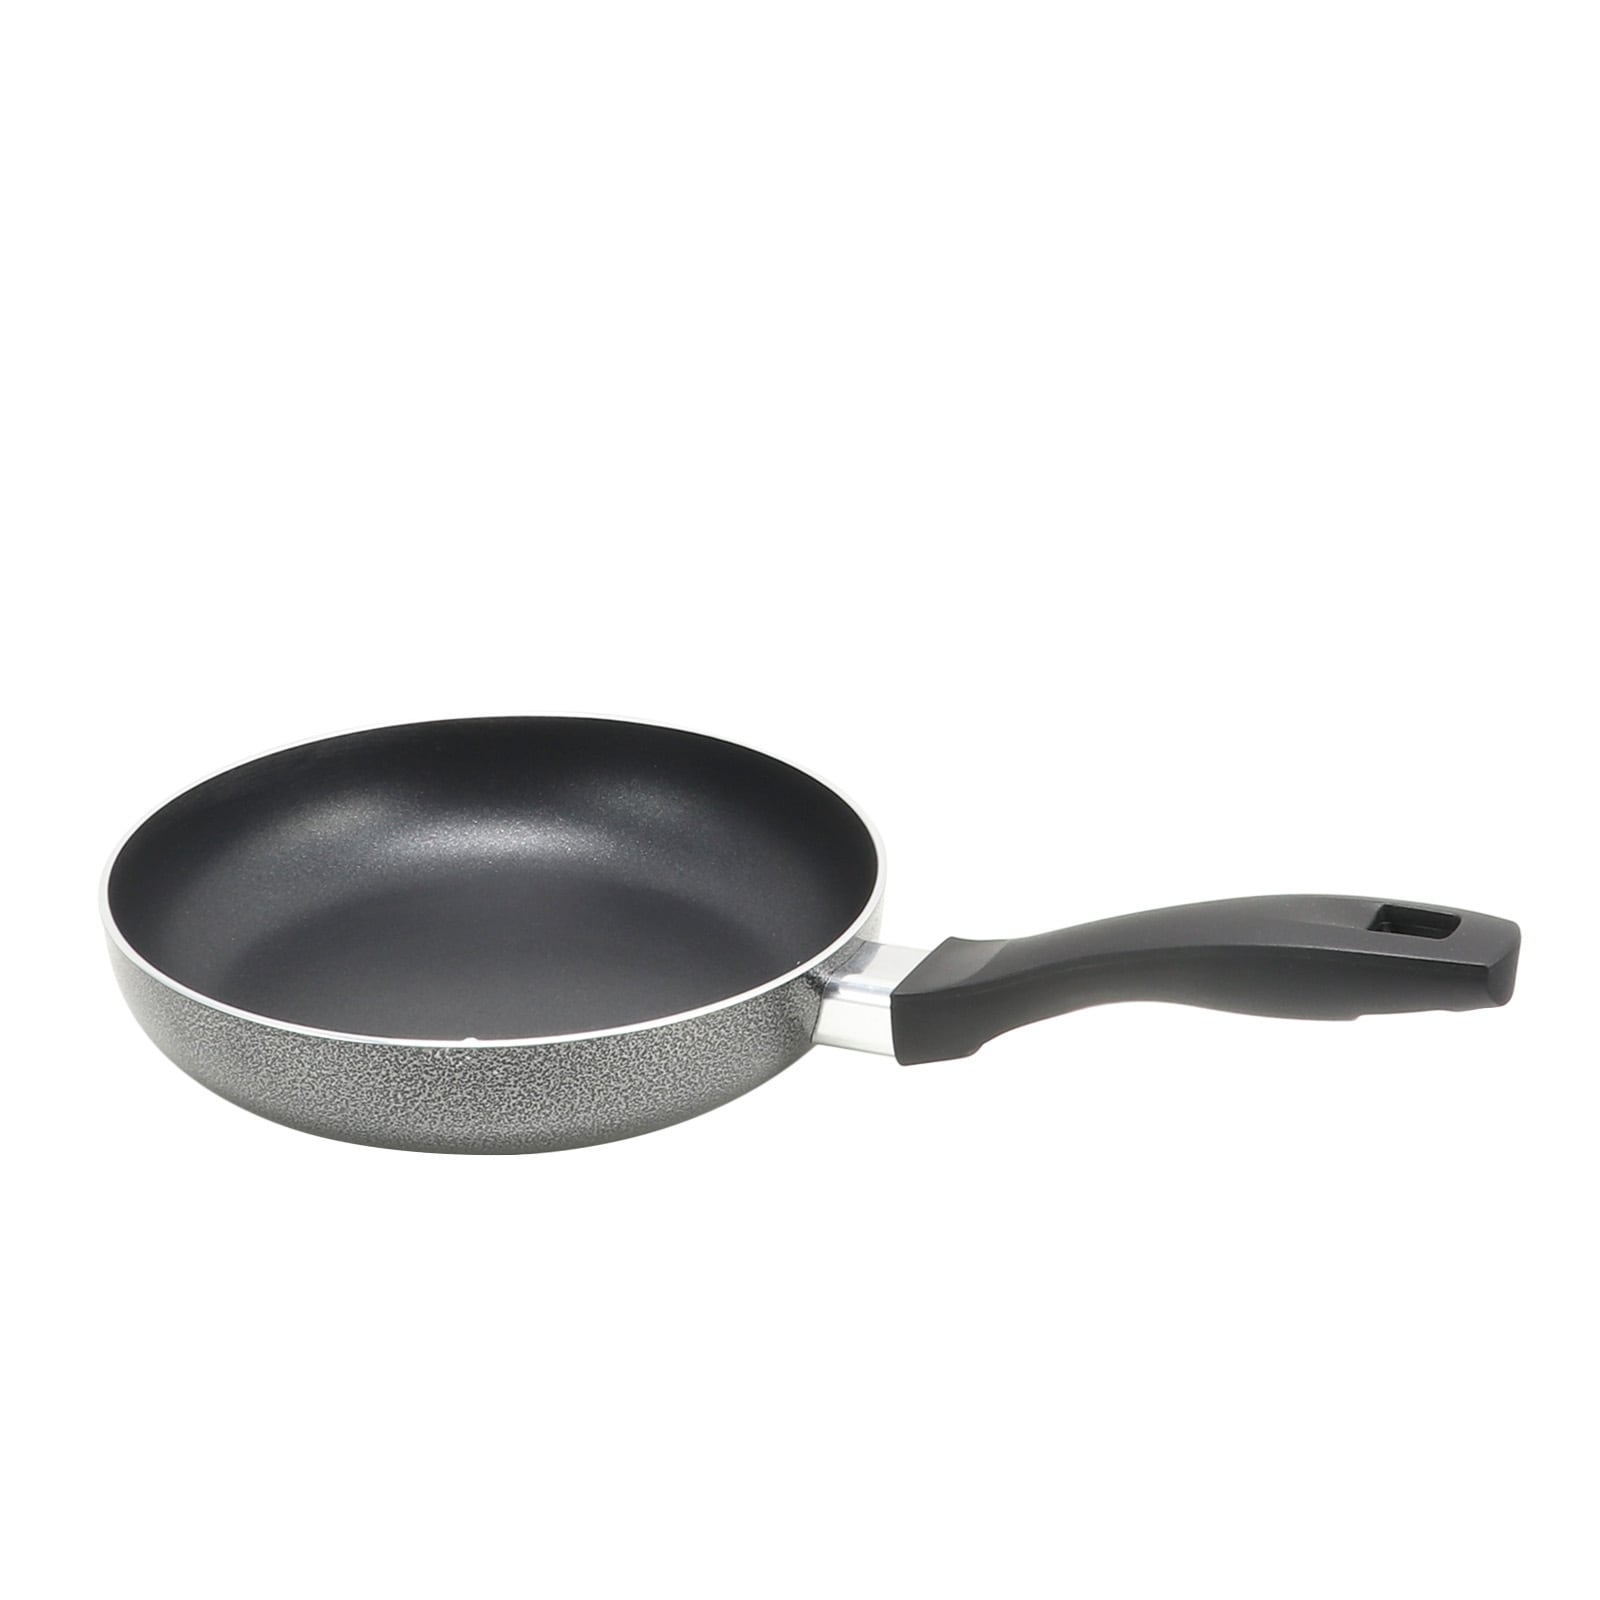 https://ak1.ostkcdn.com/images/products/is/images/direct/d86c6d64b92c3034a821e740ab3faebb587709dc/Oster-Clairborne-8-Inch-Aluminum-Frying-Pan-in-Charcoal-Grey.jpg